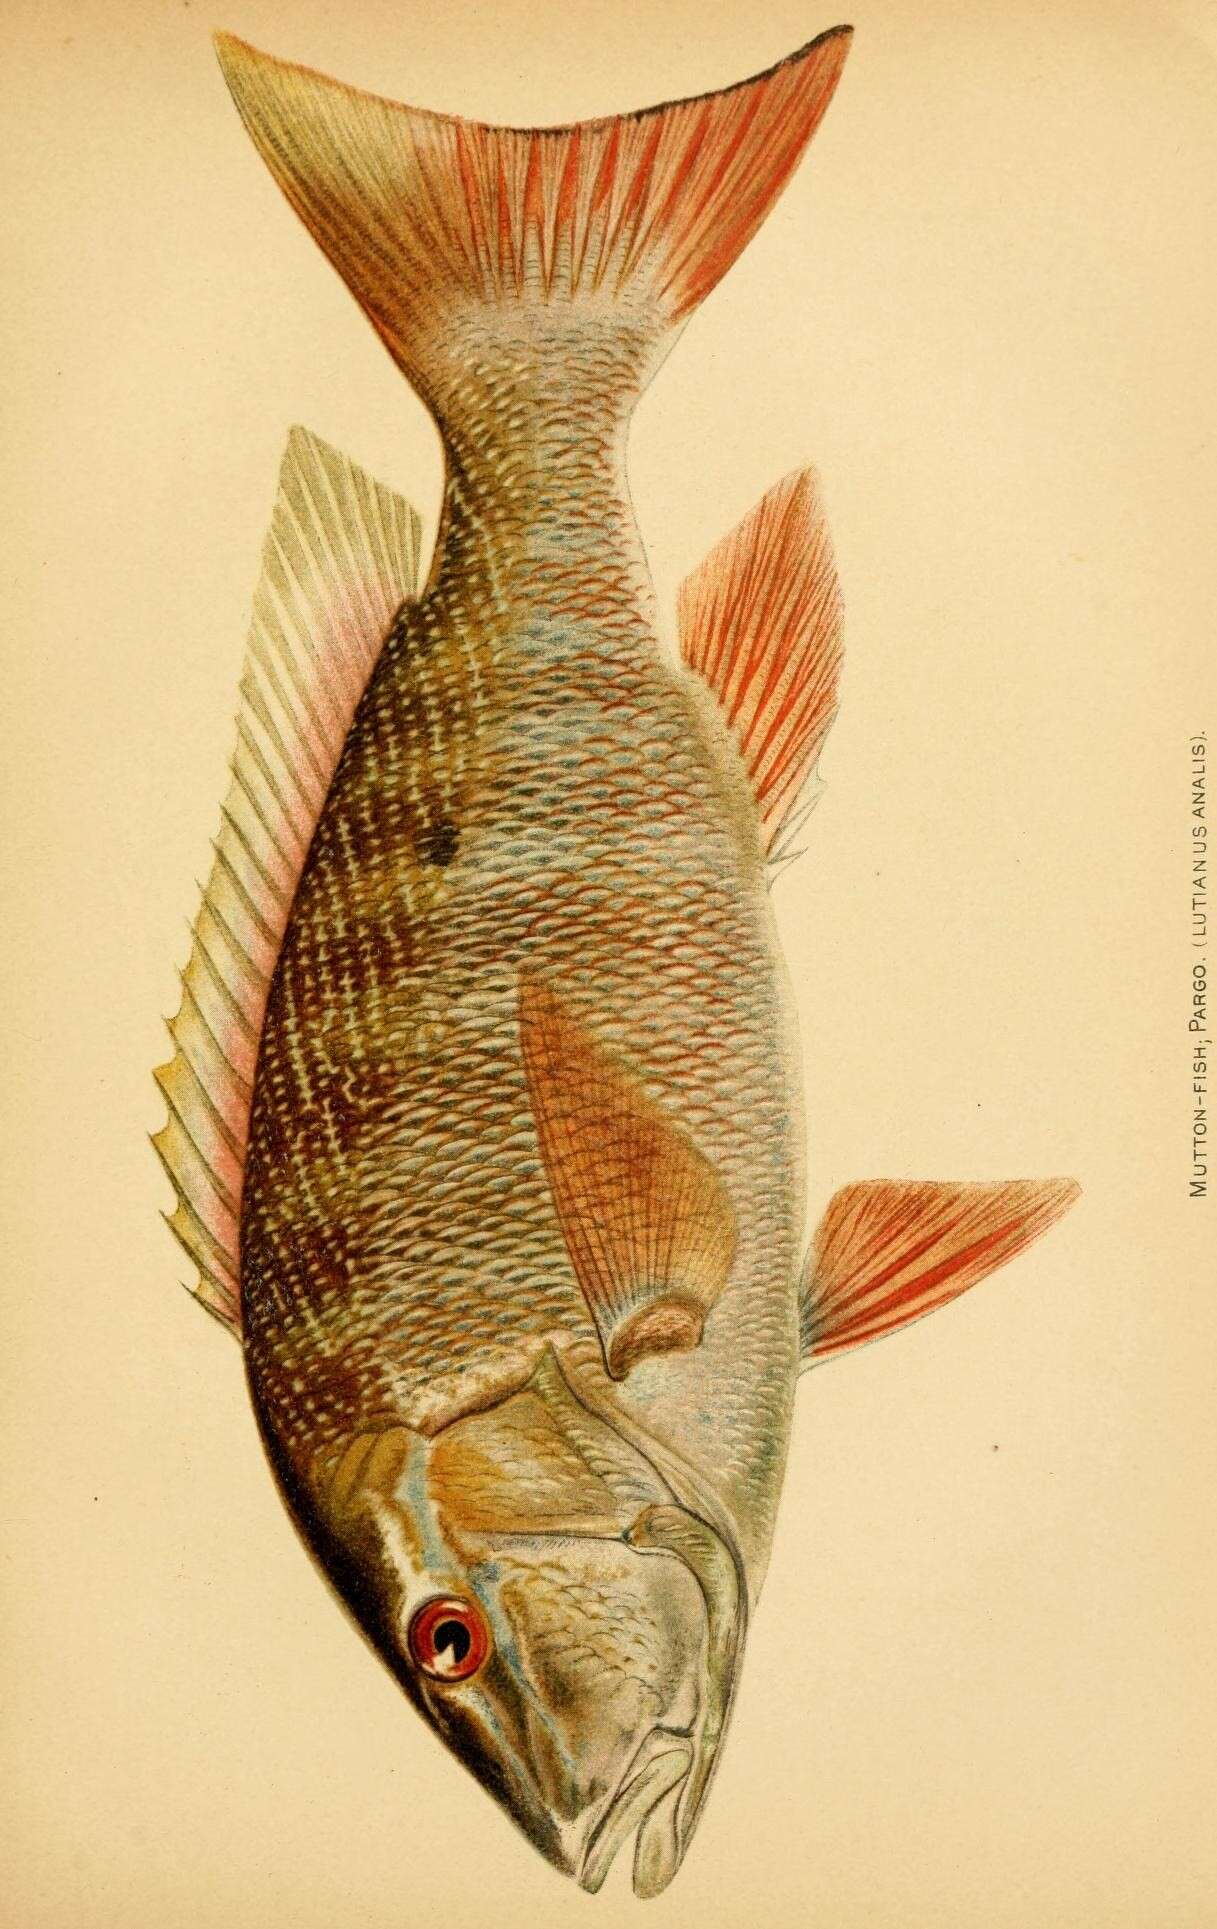 Image of Mutton Snapper